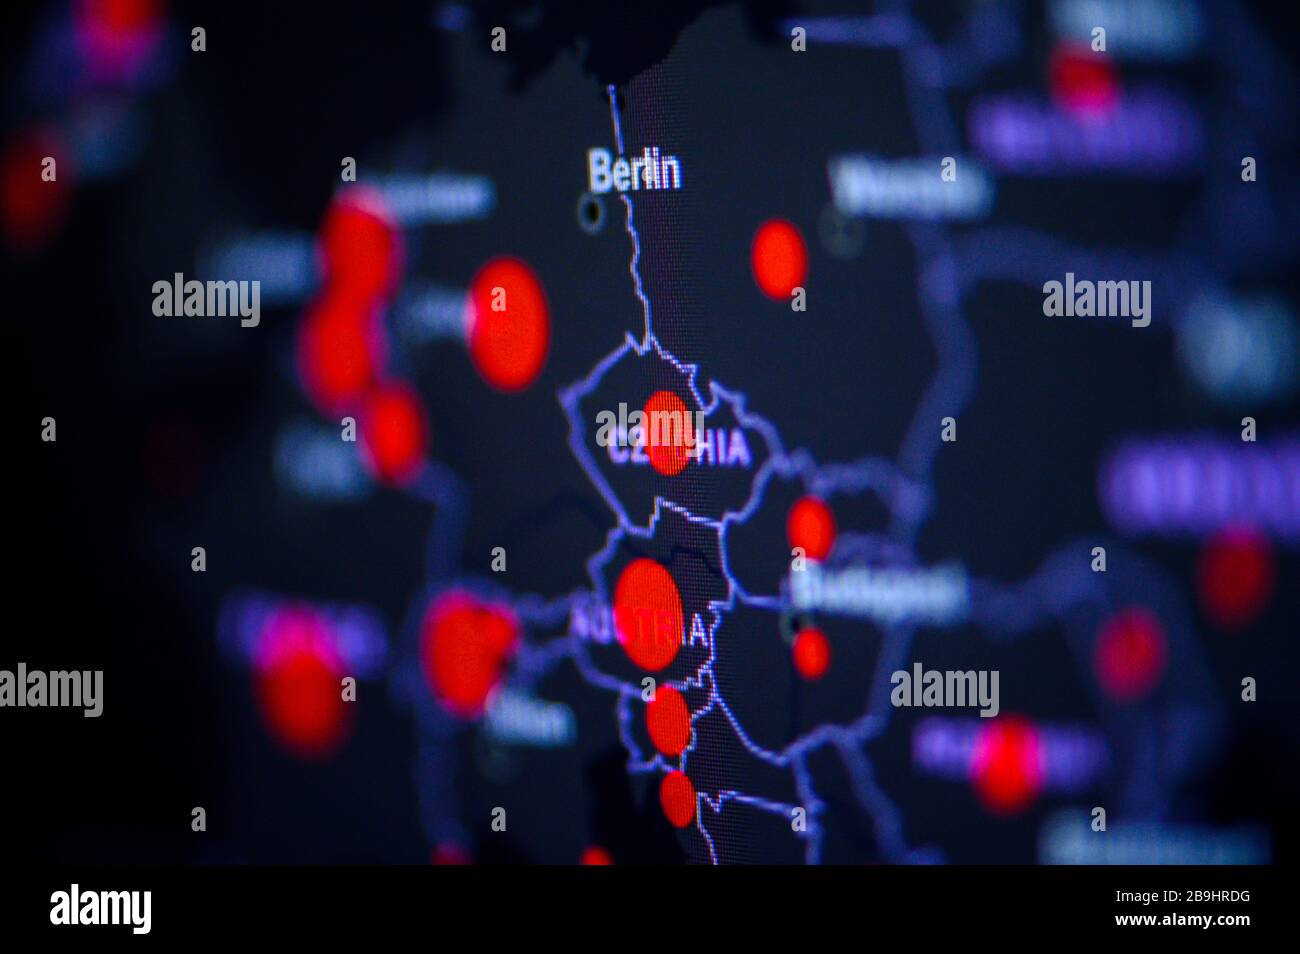 Poland, Warsaw . Coronavirus COVID-19 global cases Map. Red Dot showing the number of infected. Johns Hopkins University map on monitor display. Stock Photo